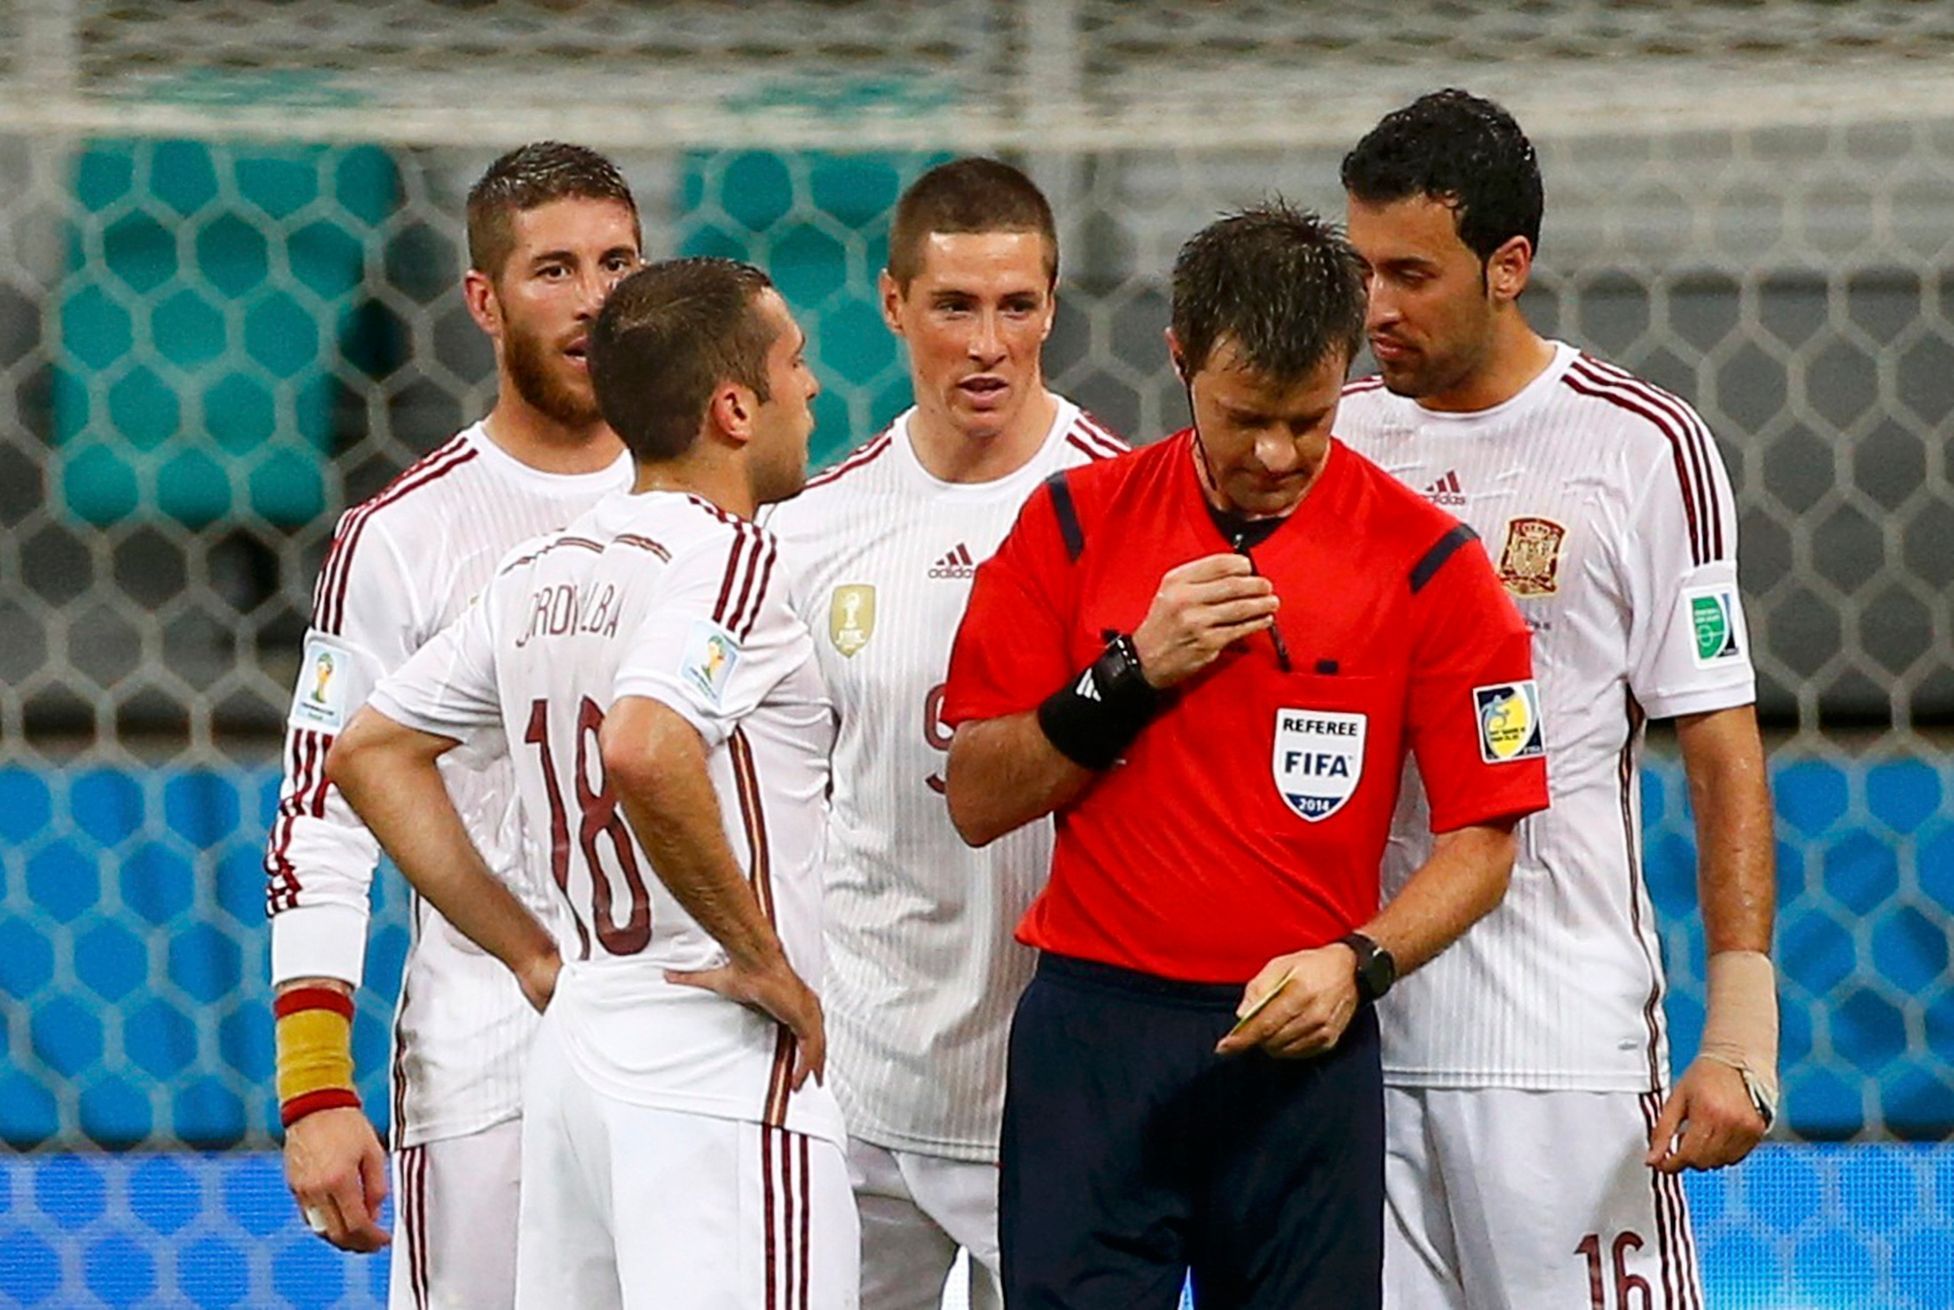 Spain's players crowd around referee Nicola Rizzoli of Italy in protest after the conceeded a goal to the Netherlands during their 2014 World Cup Group B soccer match against Spain at the Fonte Nova a